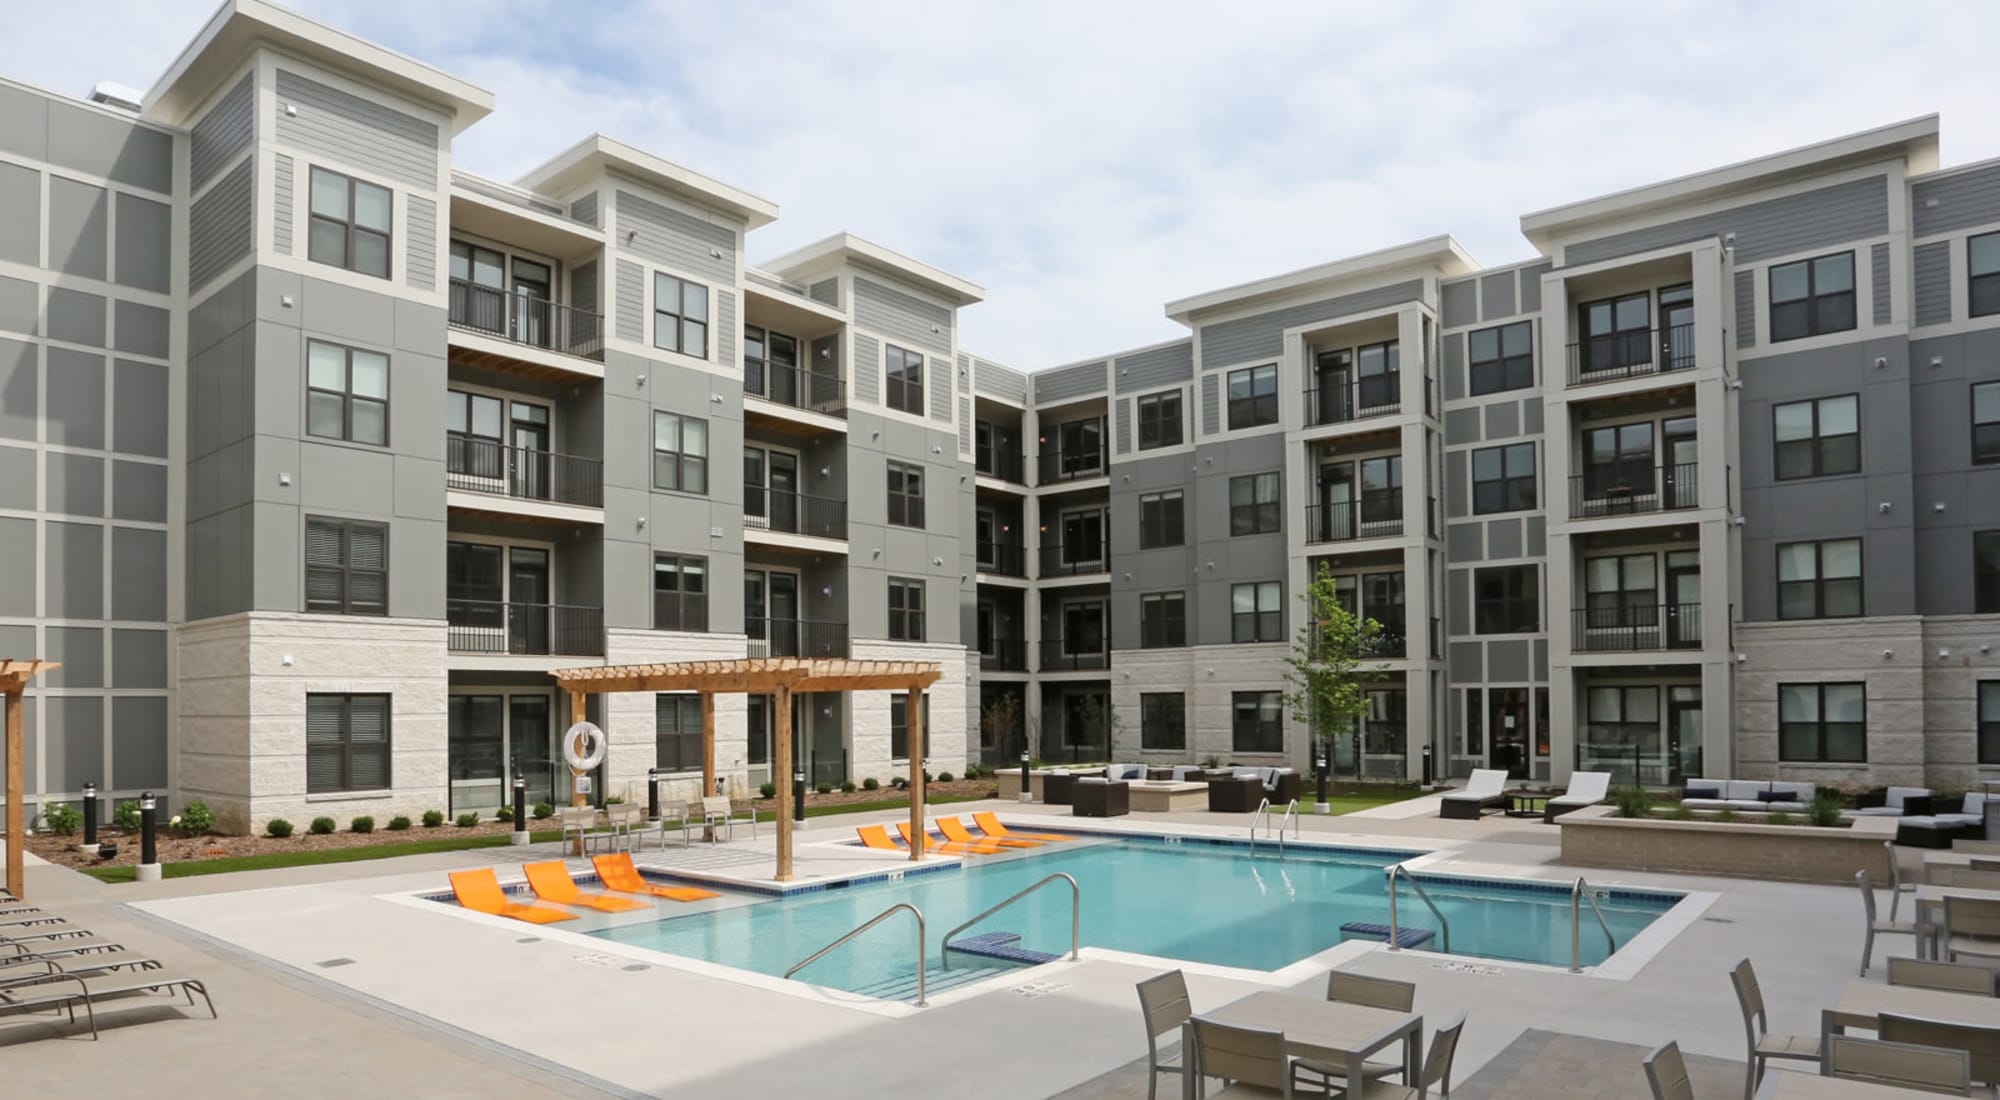 Apartments at Mayfair Reserve in Wauwatosa, Wisconsin